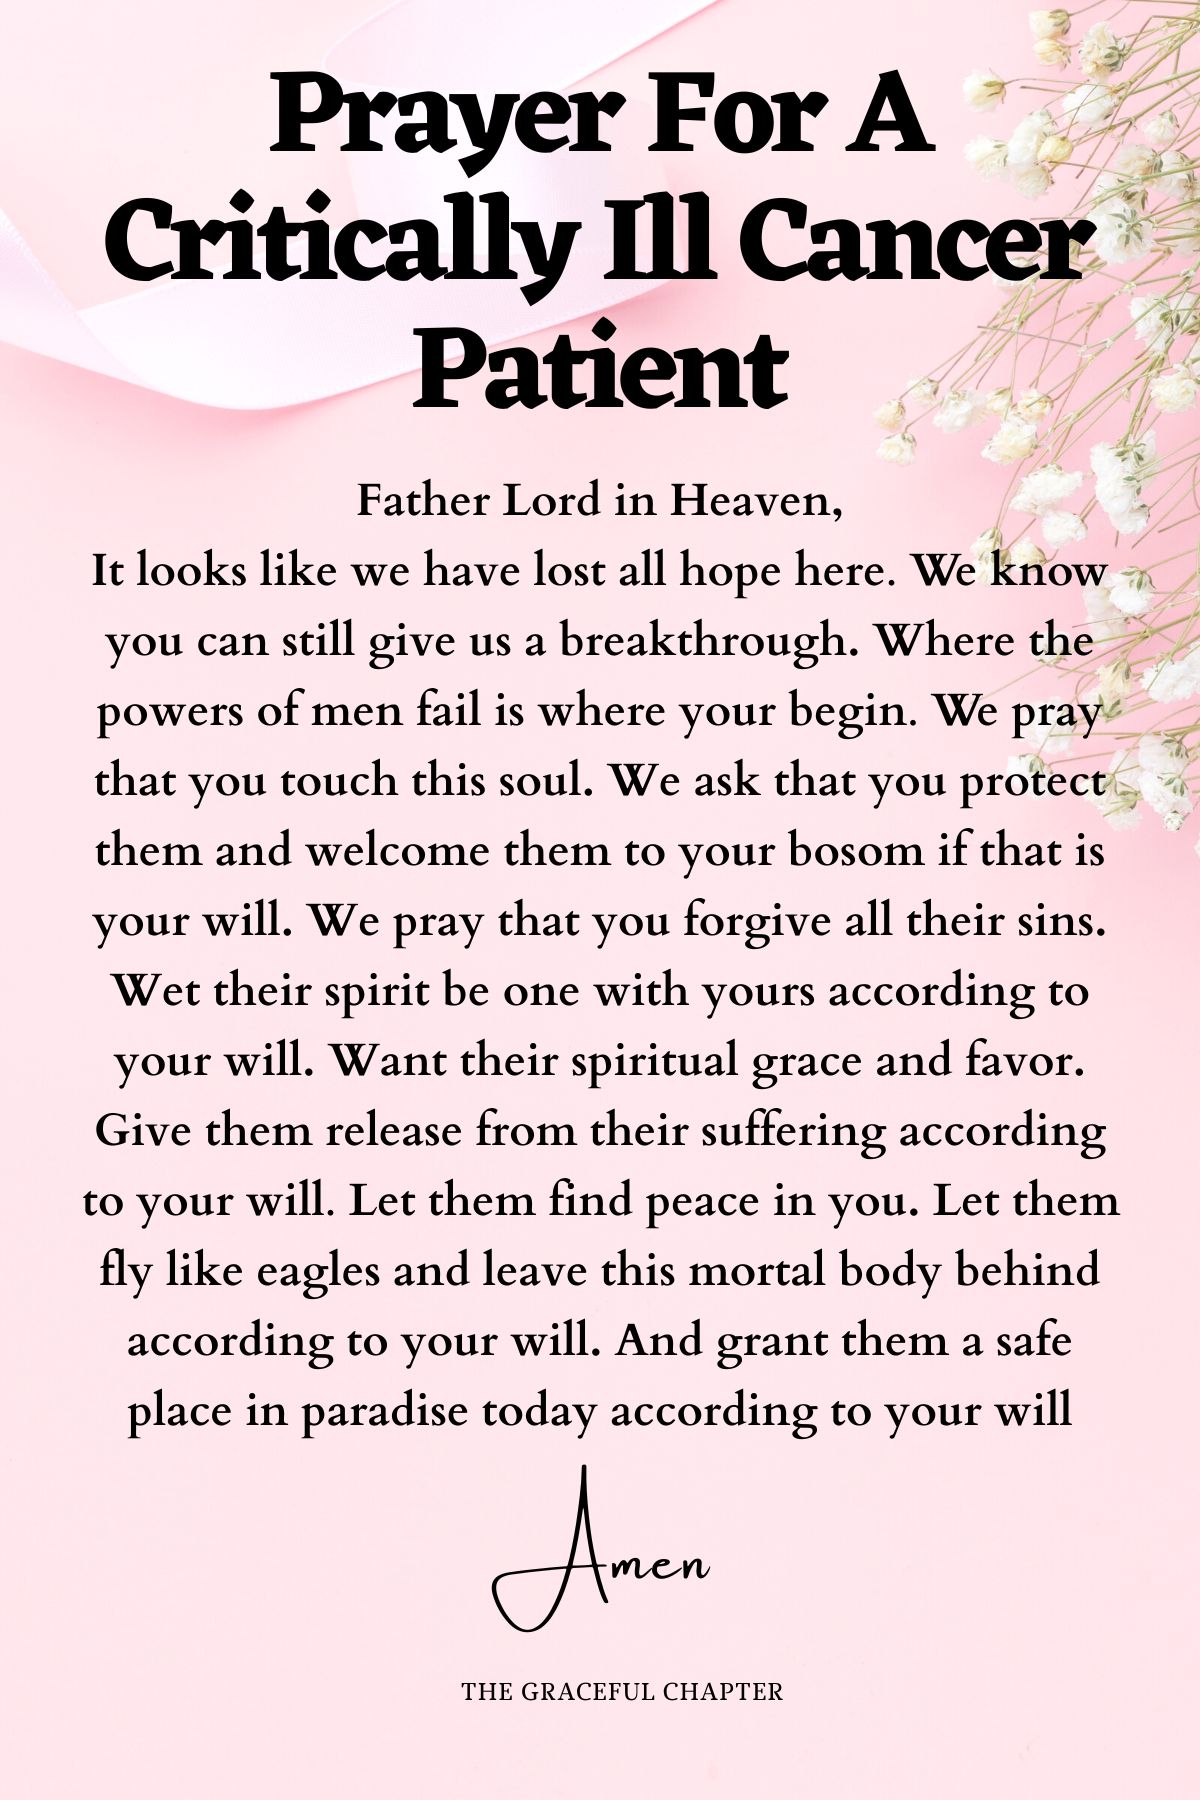 Prayer For A Critically Ill Cancer Patient